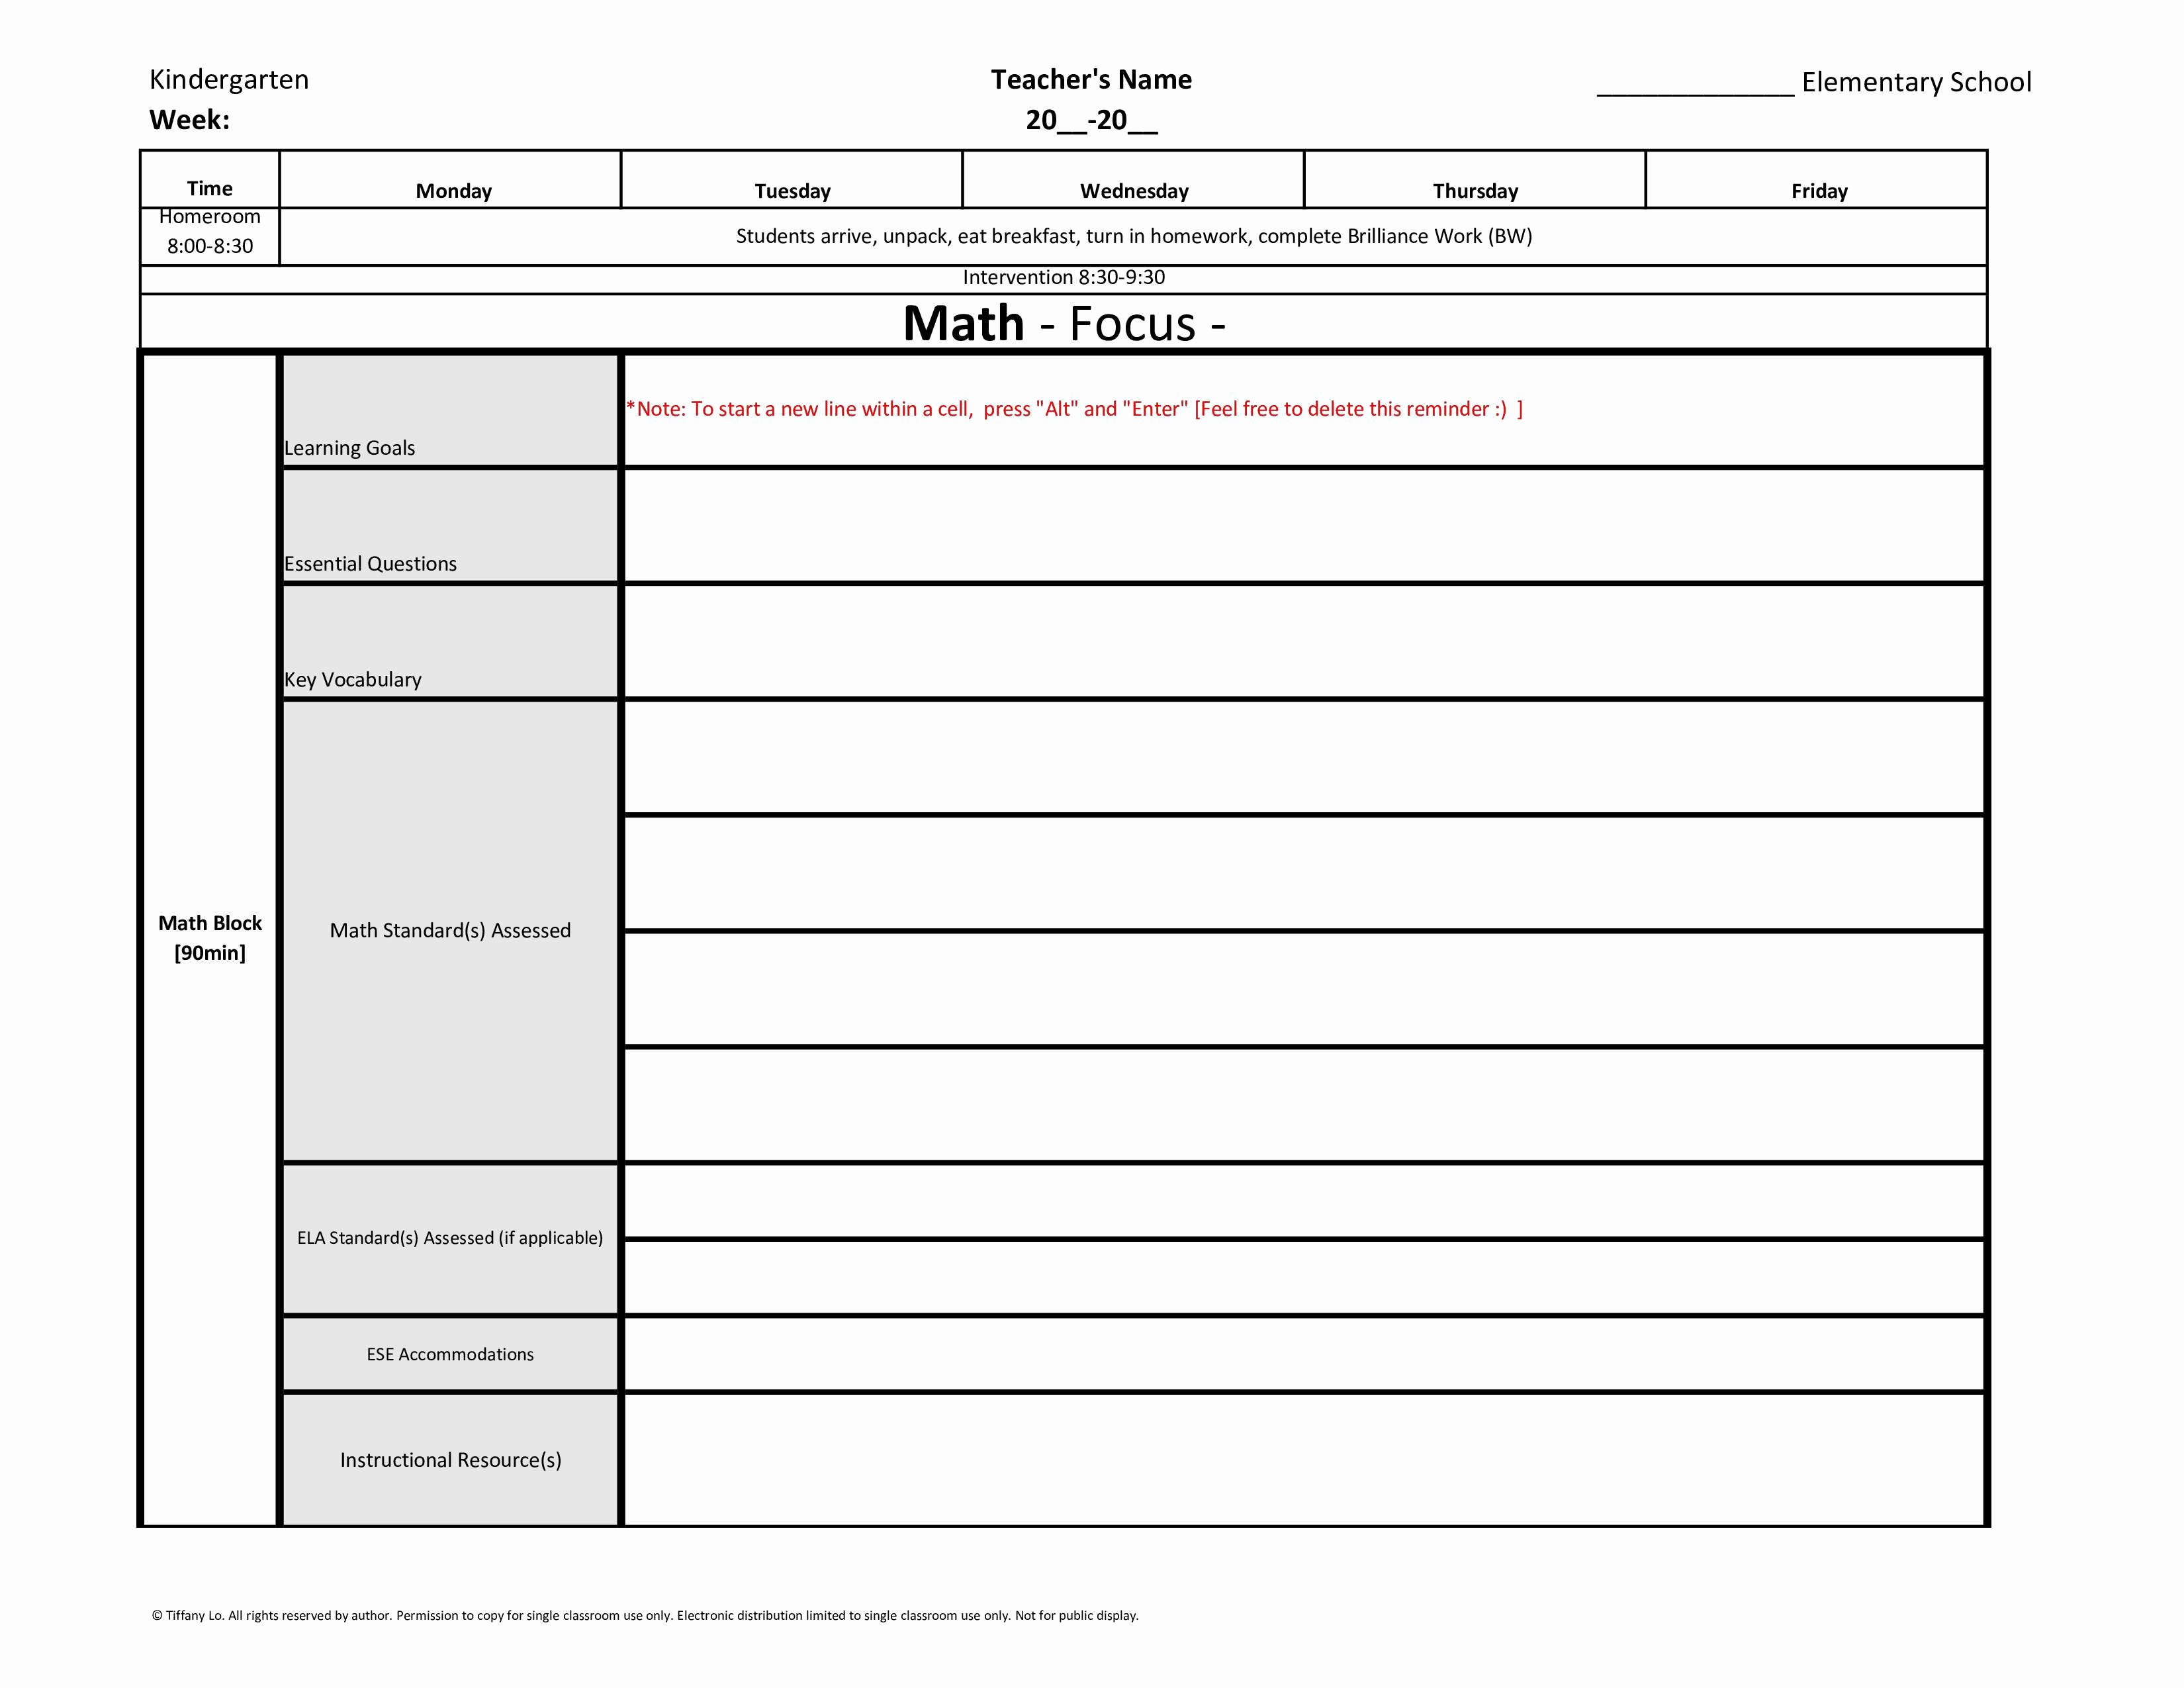 Weekly Lesson Plan Templates Elementary Awesome Kindergarten Weekly Lesson Plan Template W Florida